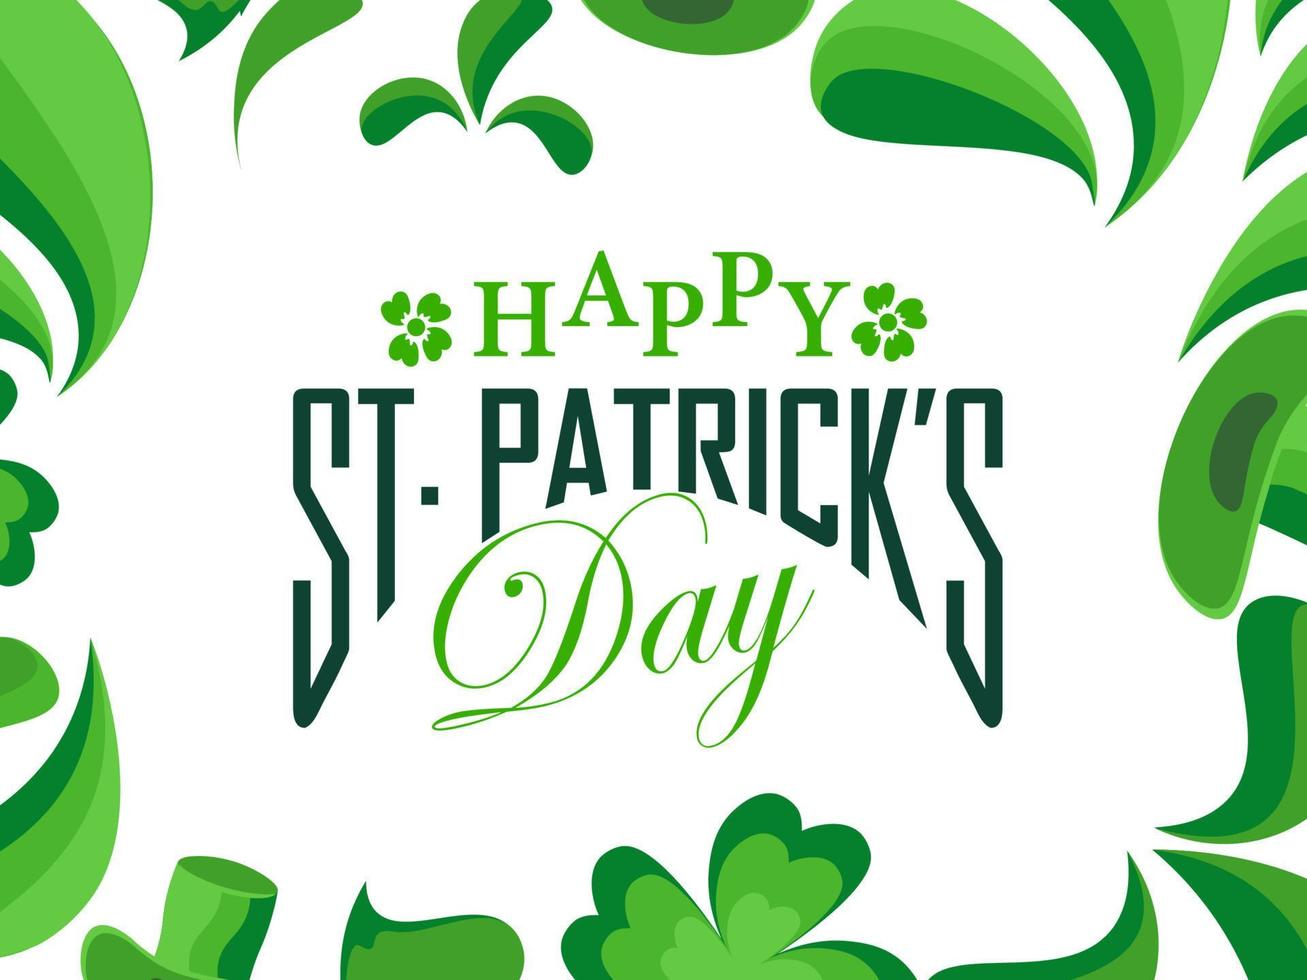 Happy St. Patrick's Day Font on White Background Decorated with Leprechaun Hat, Shamrock Leaves and Green Arc Drops. vector